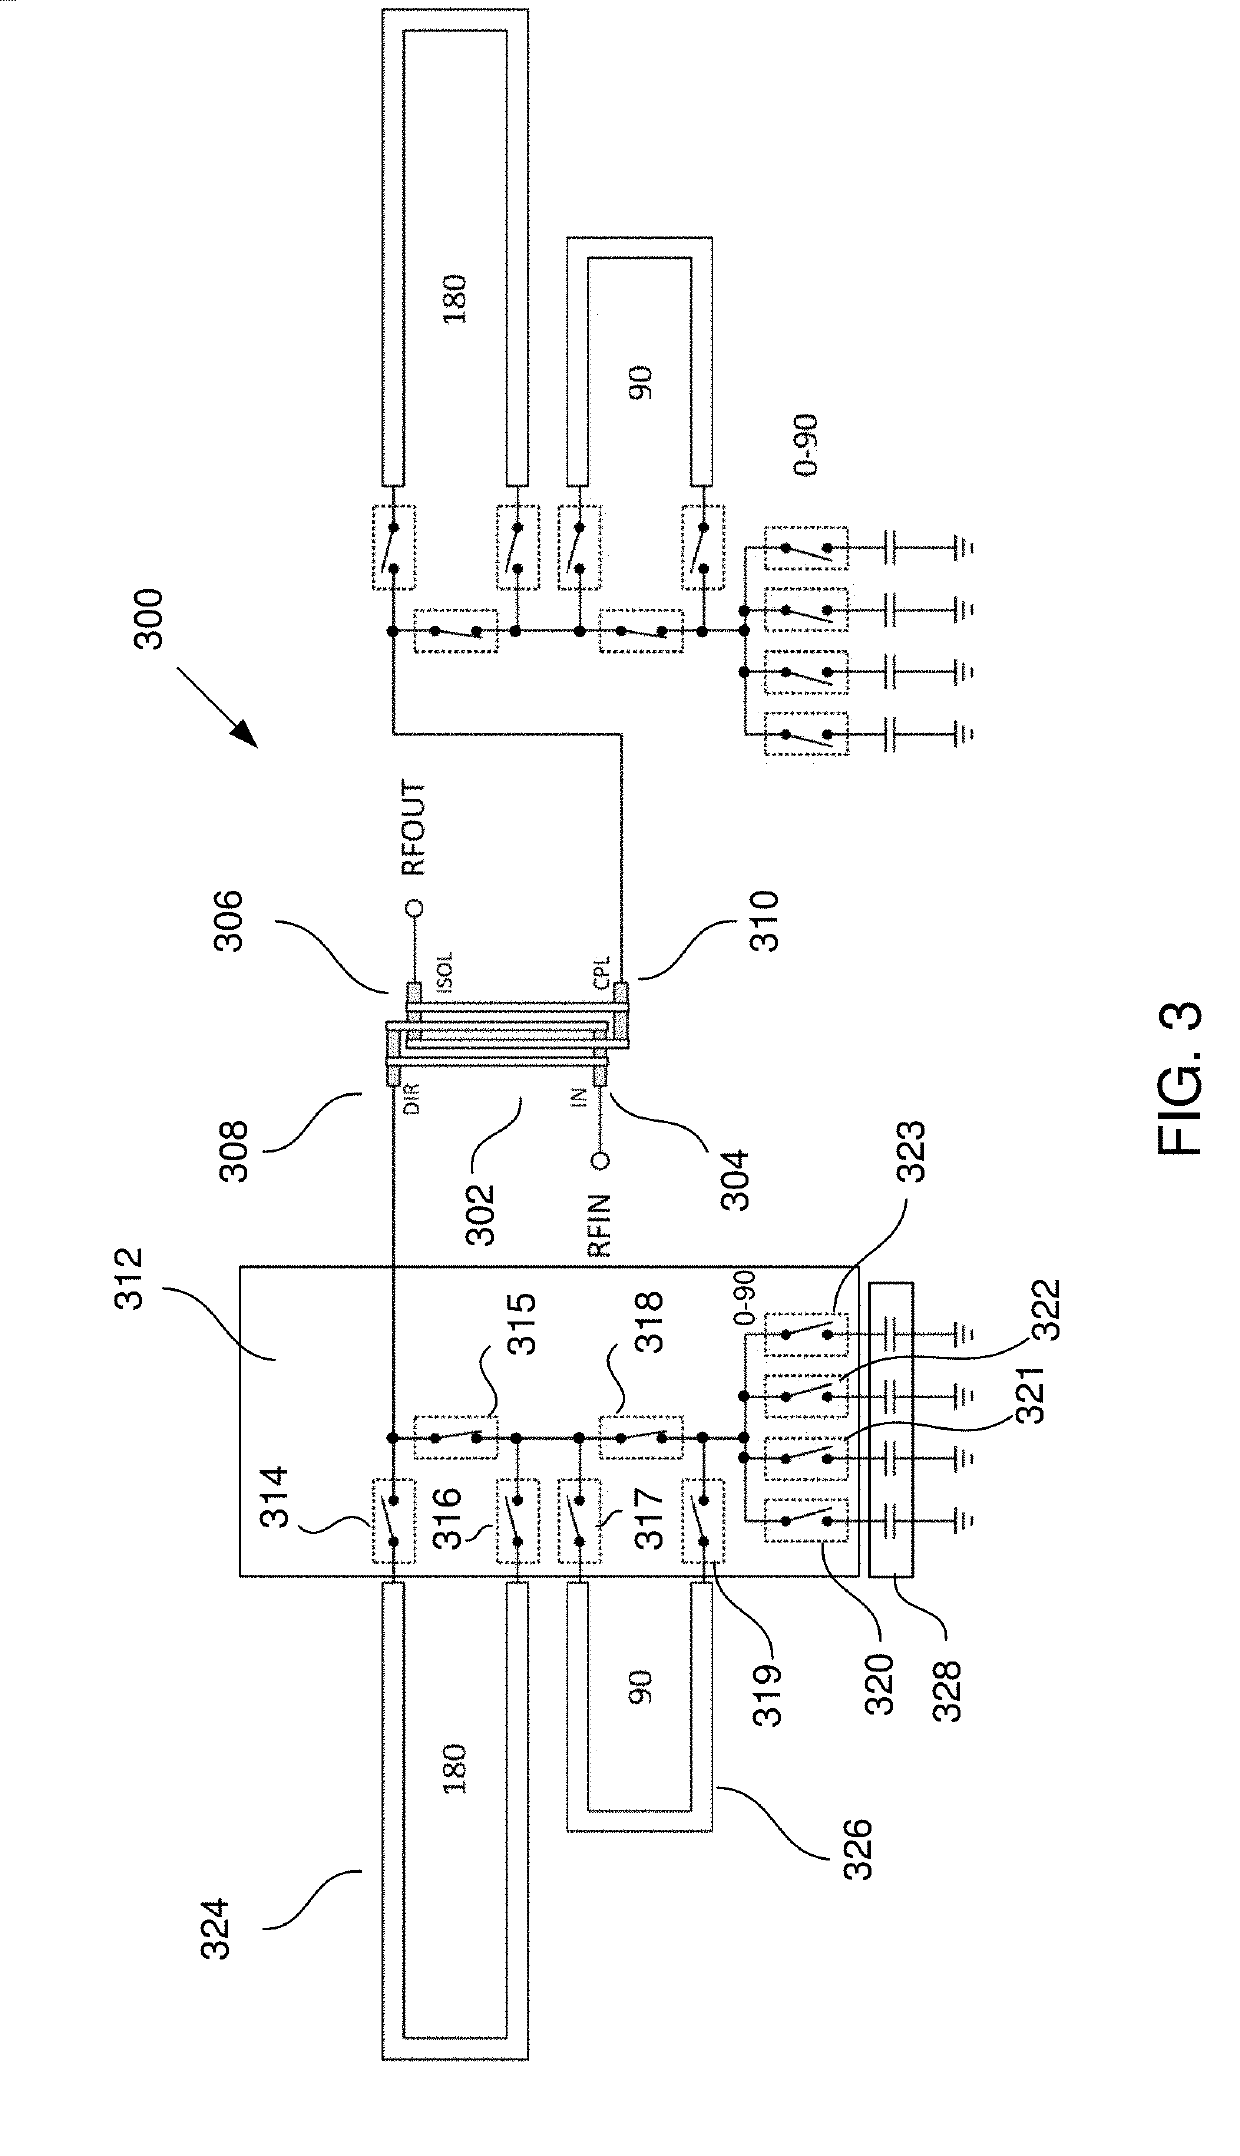 Low Loss Reflective Passive Phase Shifter using Time Delay Element